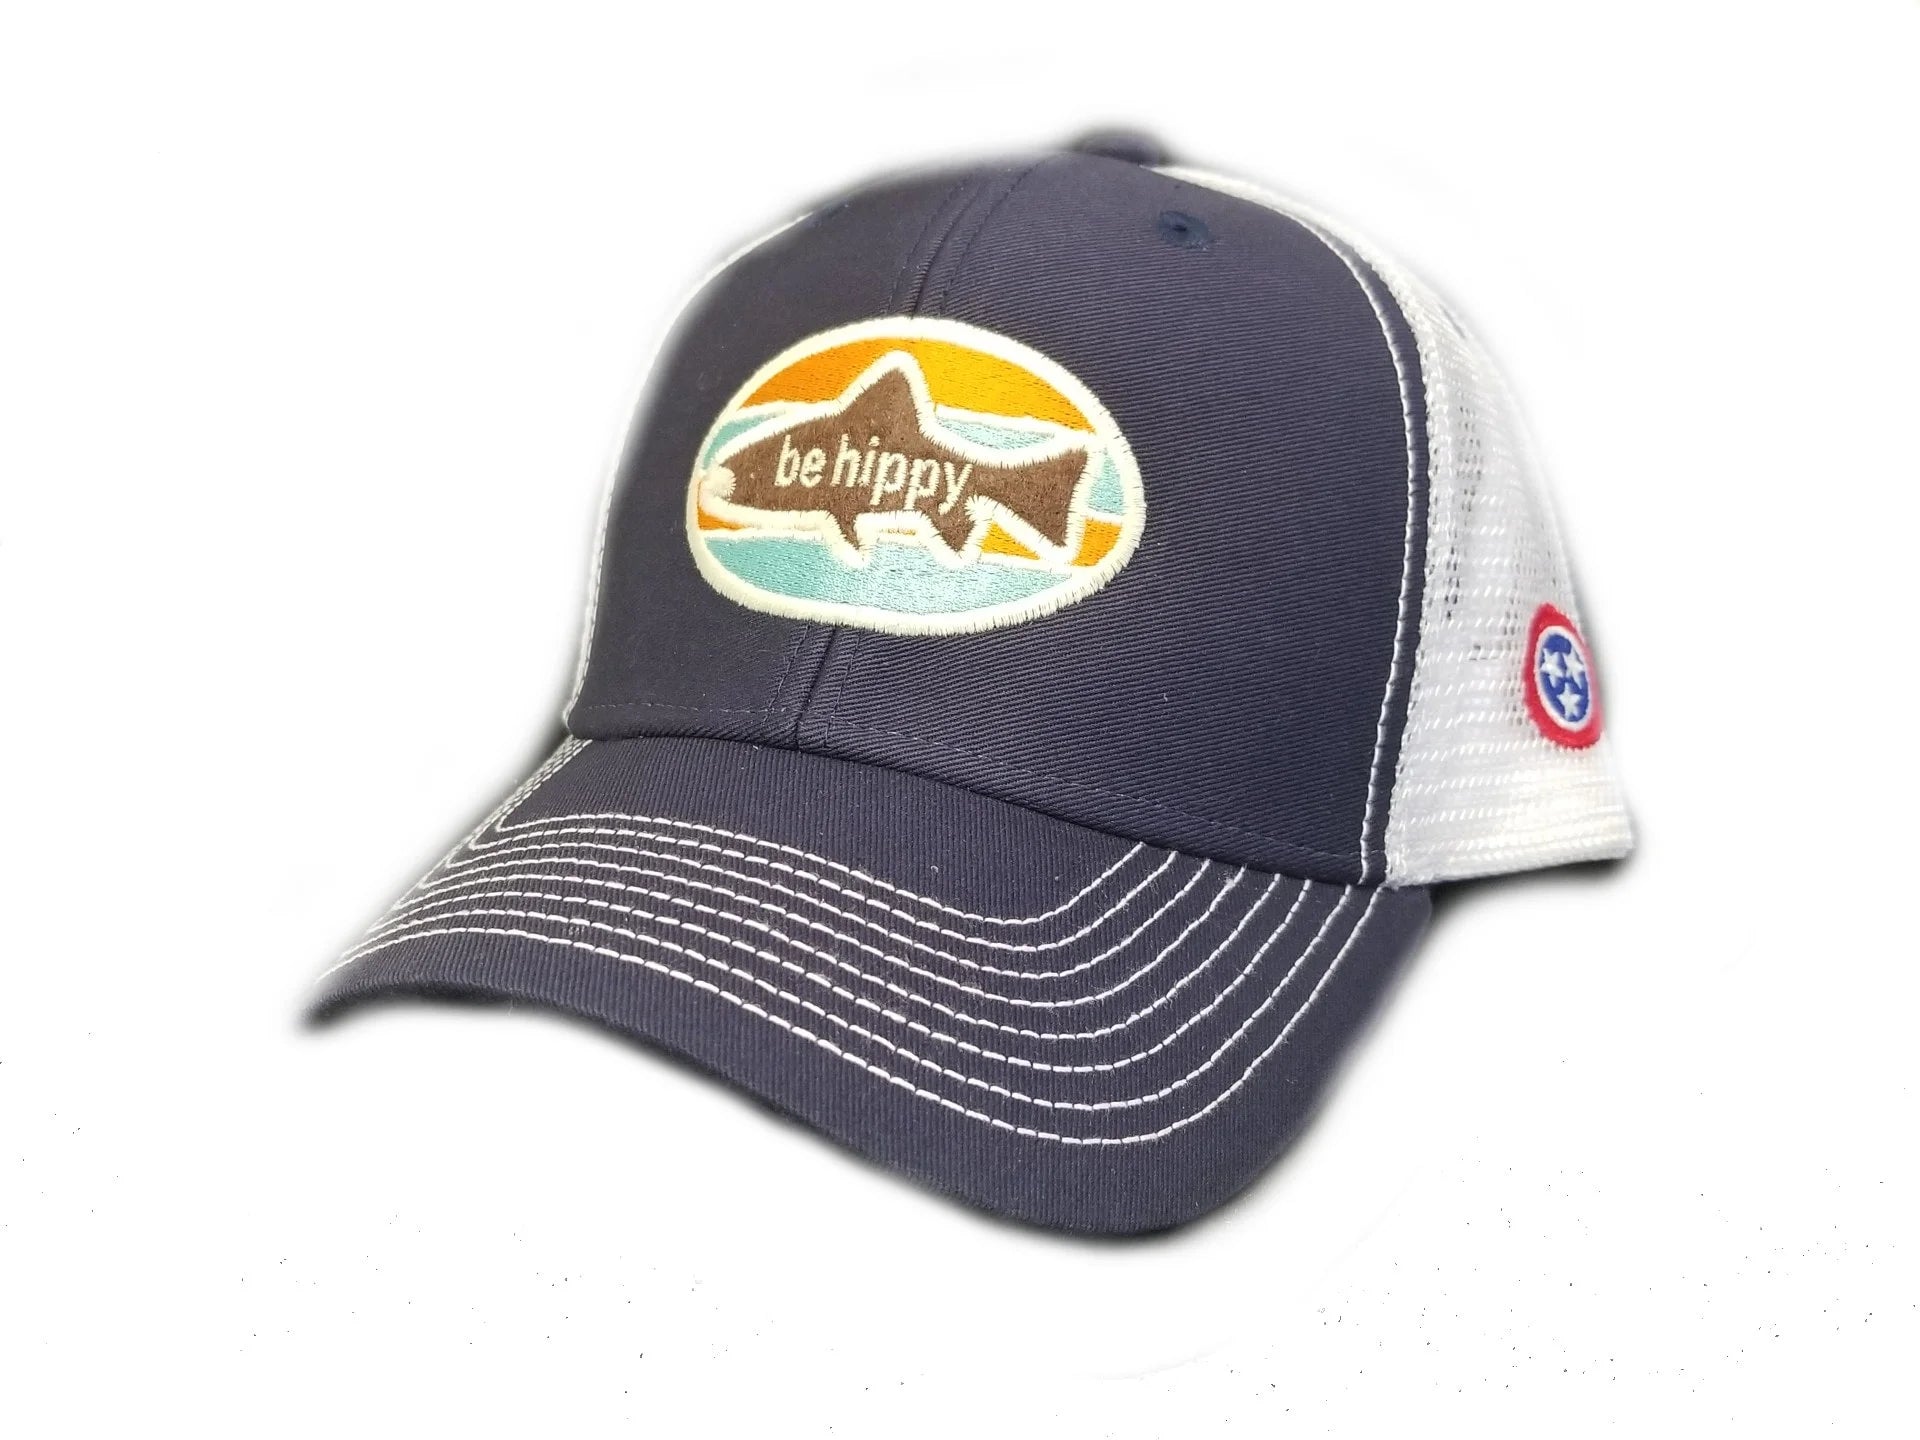 Be Hippy Fish Logo Trucker Hat - Tennessee Flag Navy with Cream